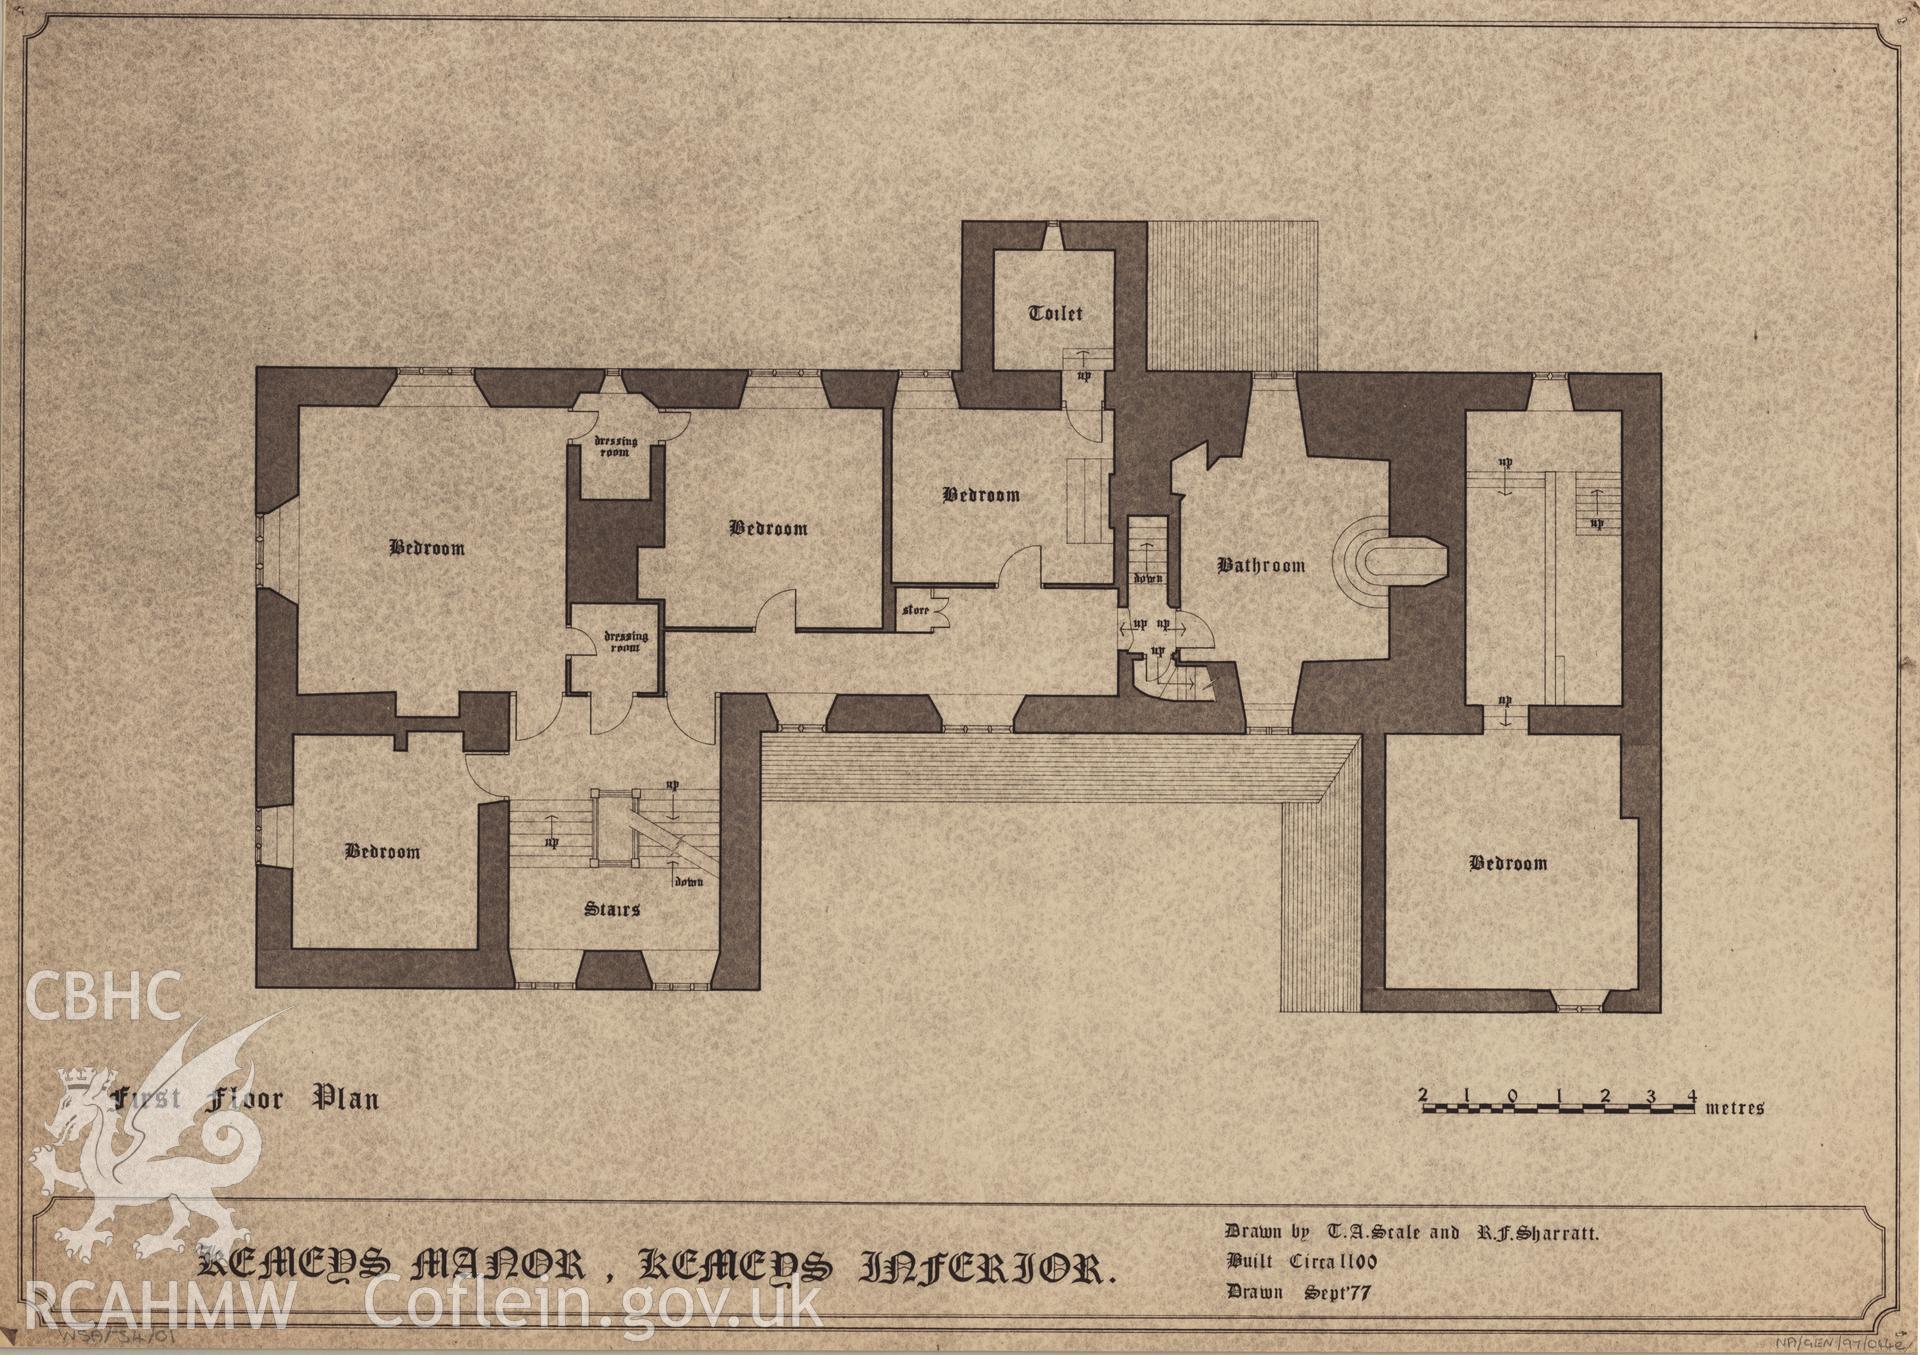 Measured drawing showing first floor plan of Kemey's Manor, Kemeys Inferior, produced by T.A. Scale and R.F. Sharratt, September 1977.